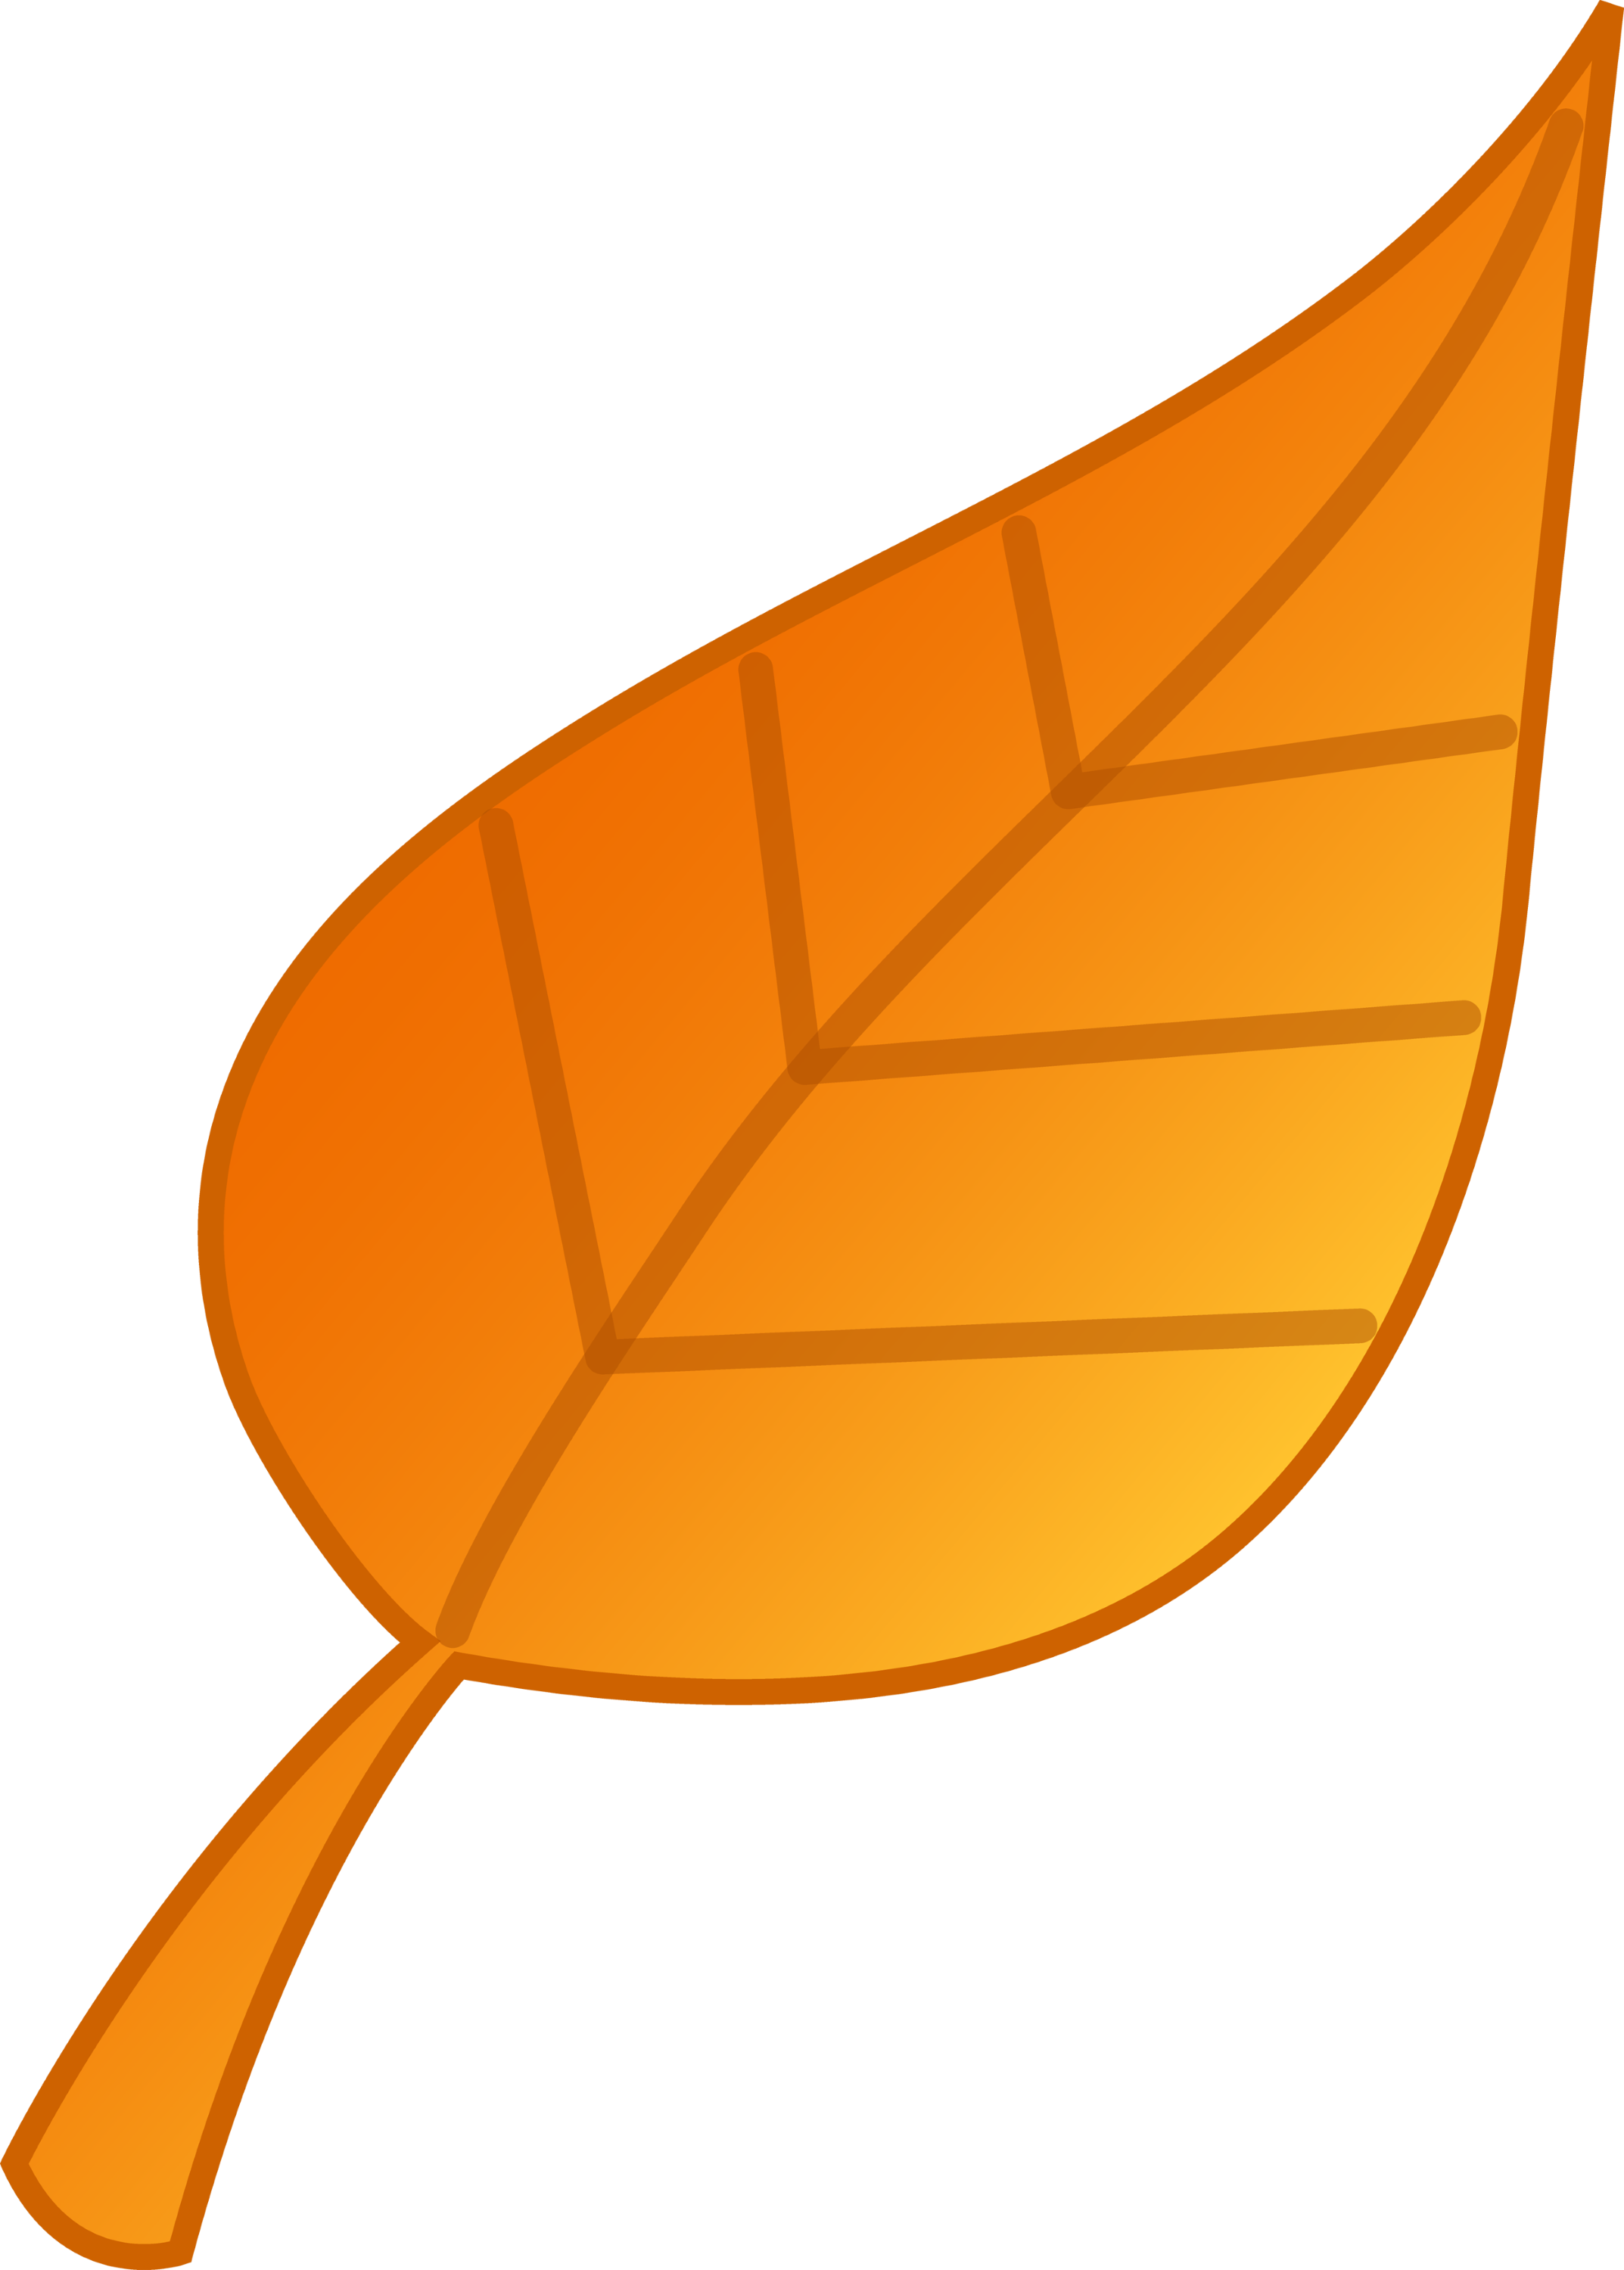 clipart of a leaf - photo #28